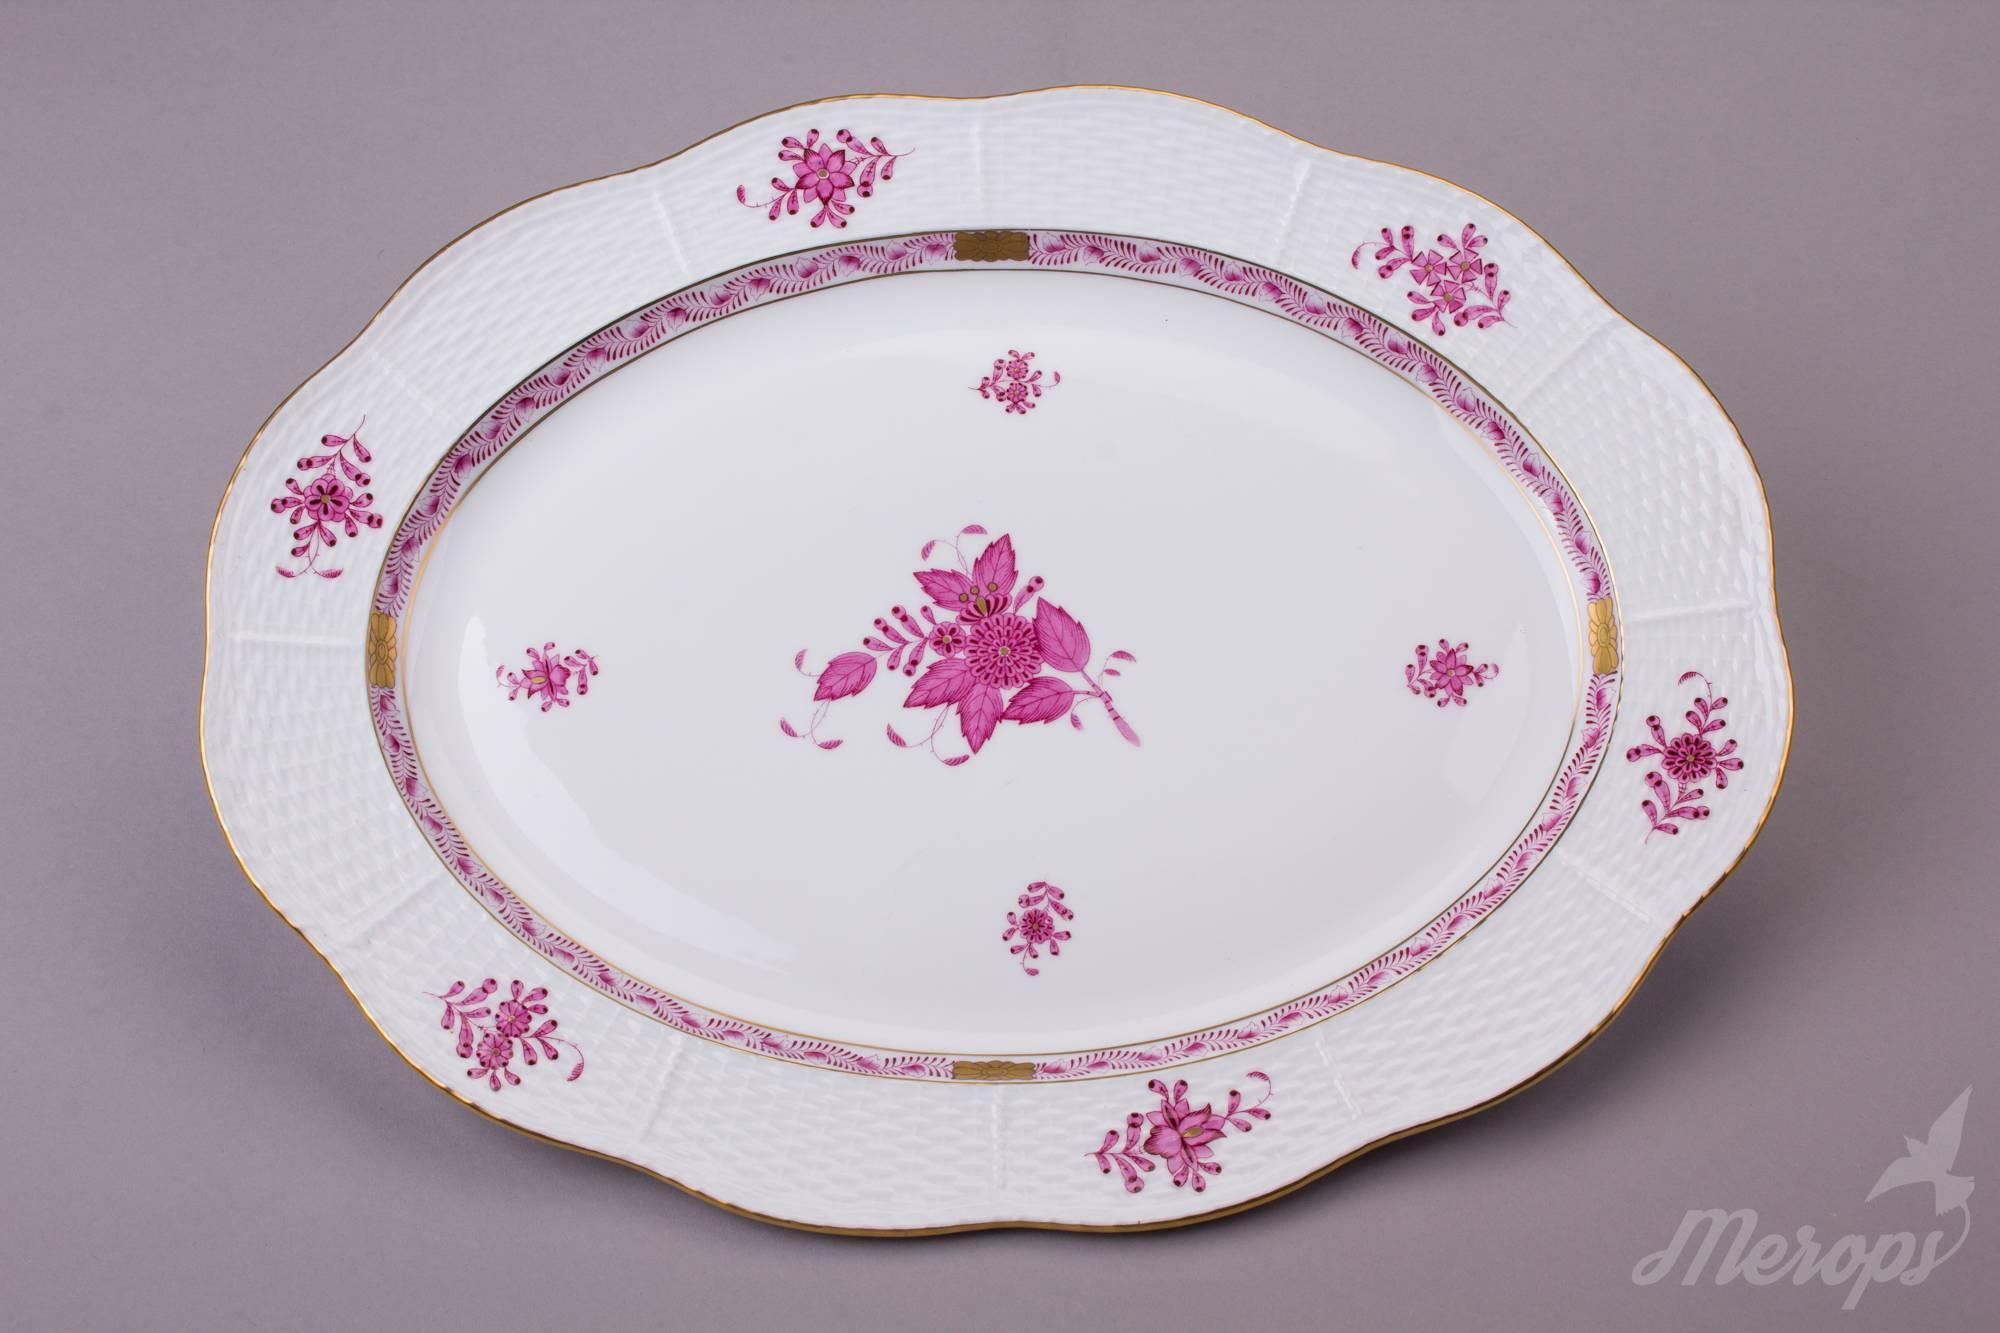 Mid-20th Century Herend Chinese Bouquet Raspberry Dinner Service for Six Persons, cca. 1960